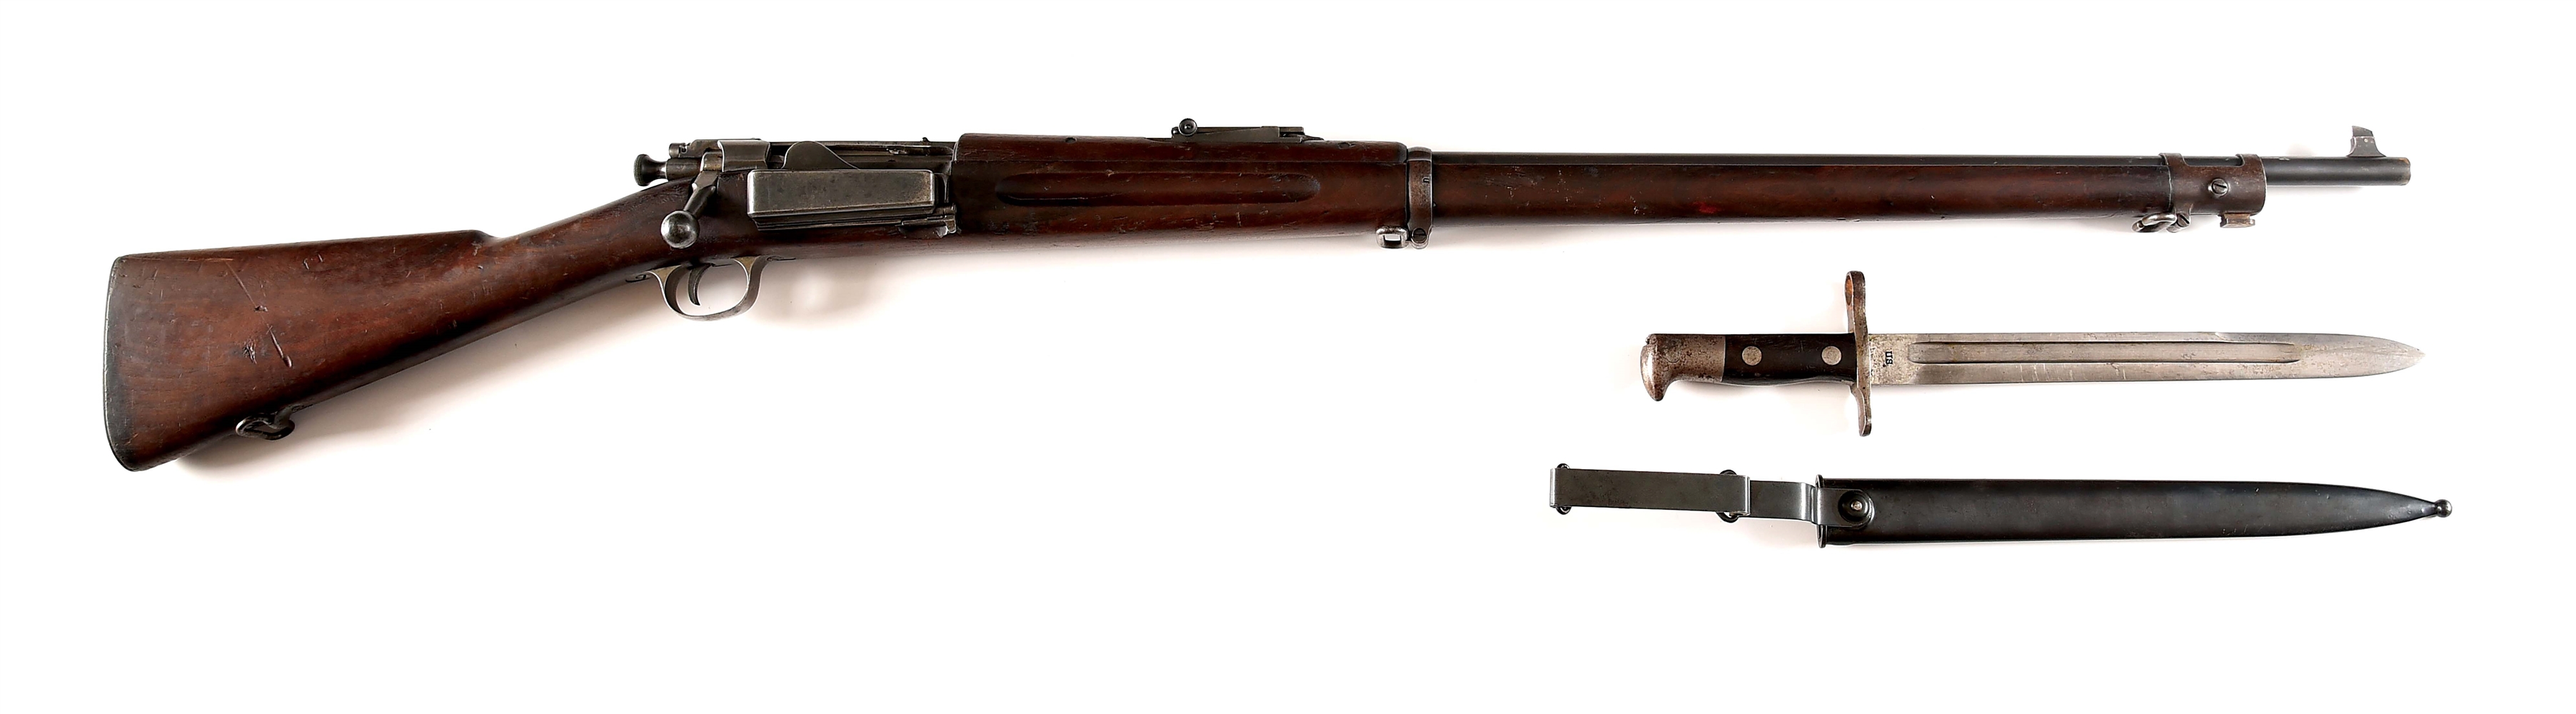 (C) SPRINGFIELD MODEL 1898 BOLT ACTION RIFLE WITH BAYONET.